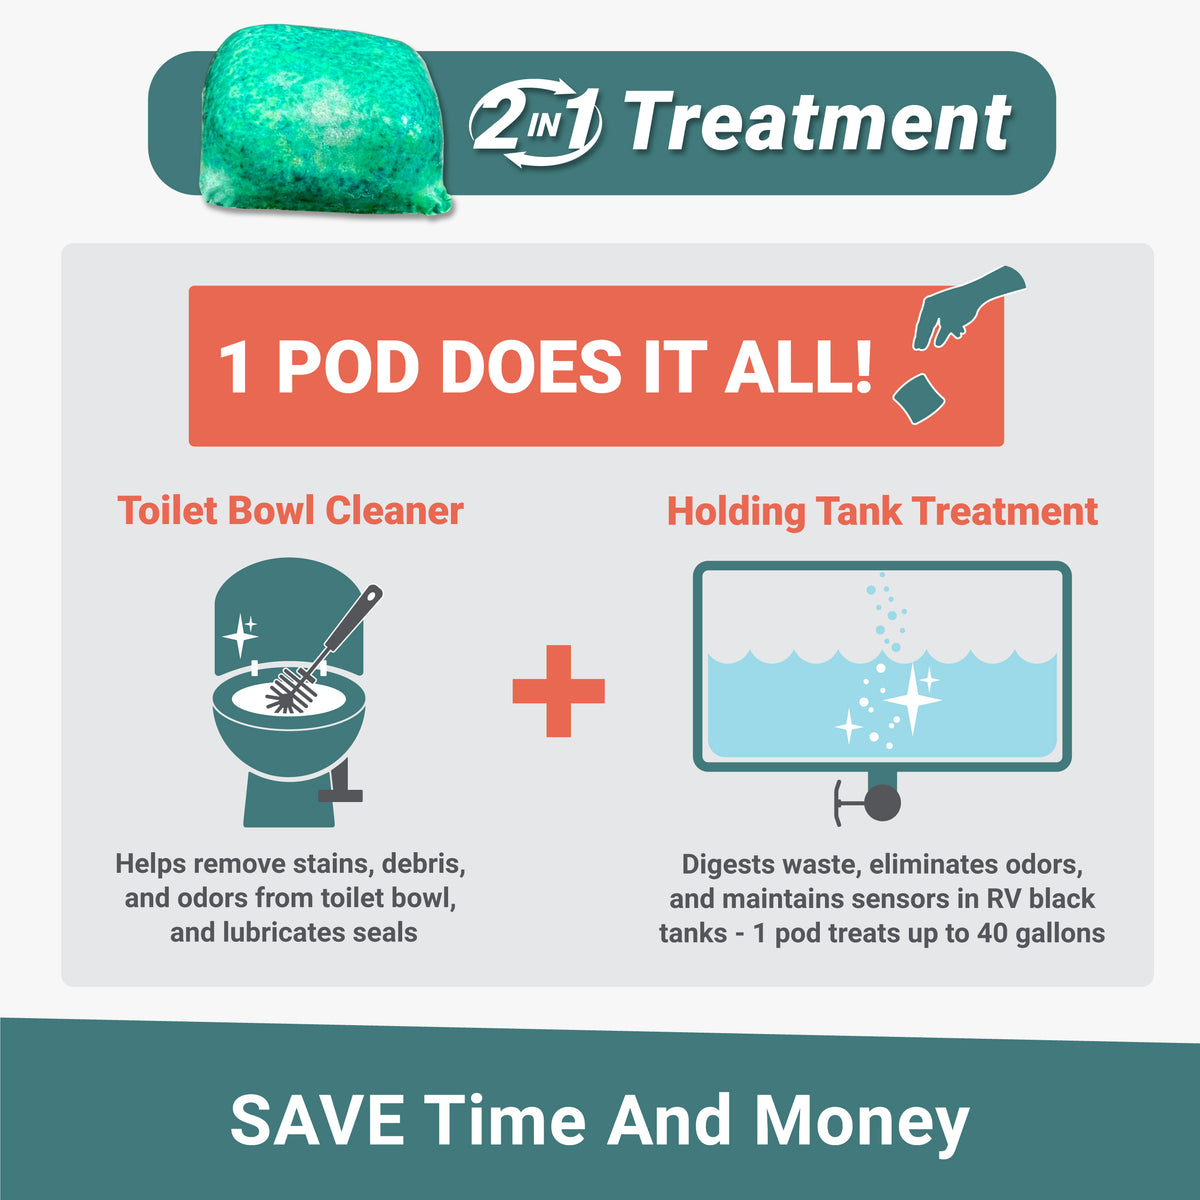 2-in-1 Treatment! Flush-It does it all! Unique Camping + Marine